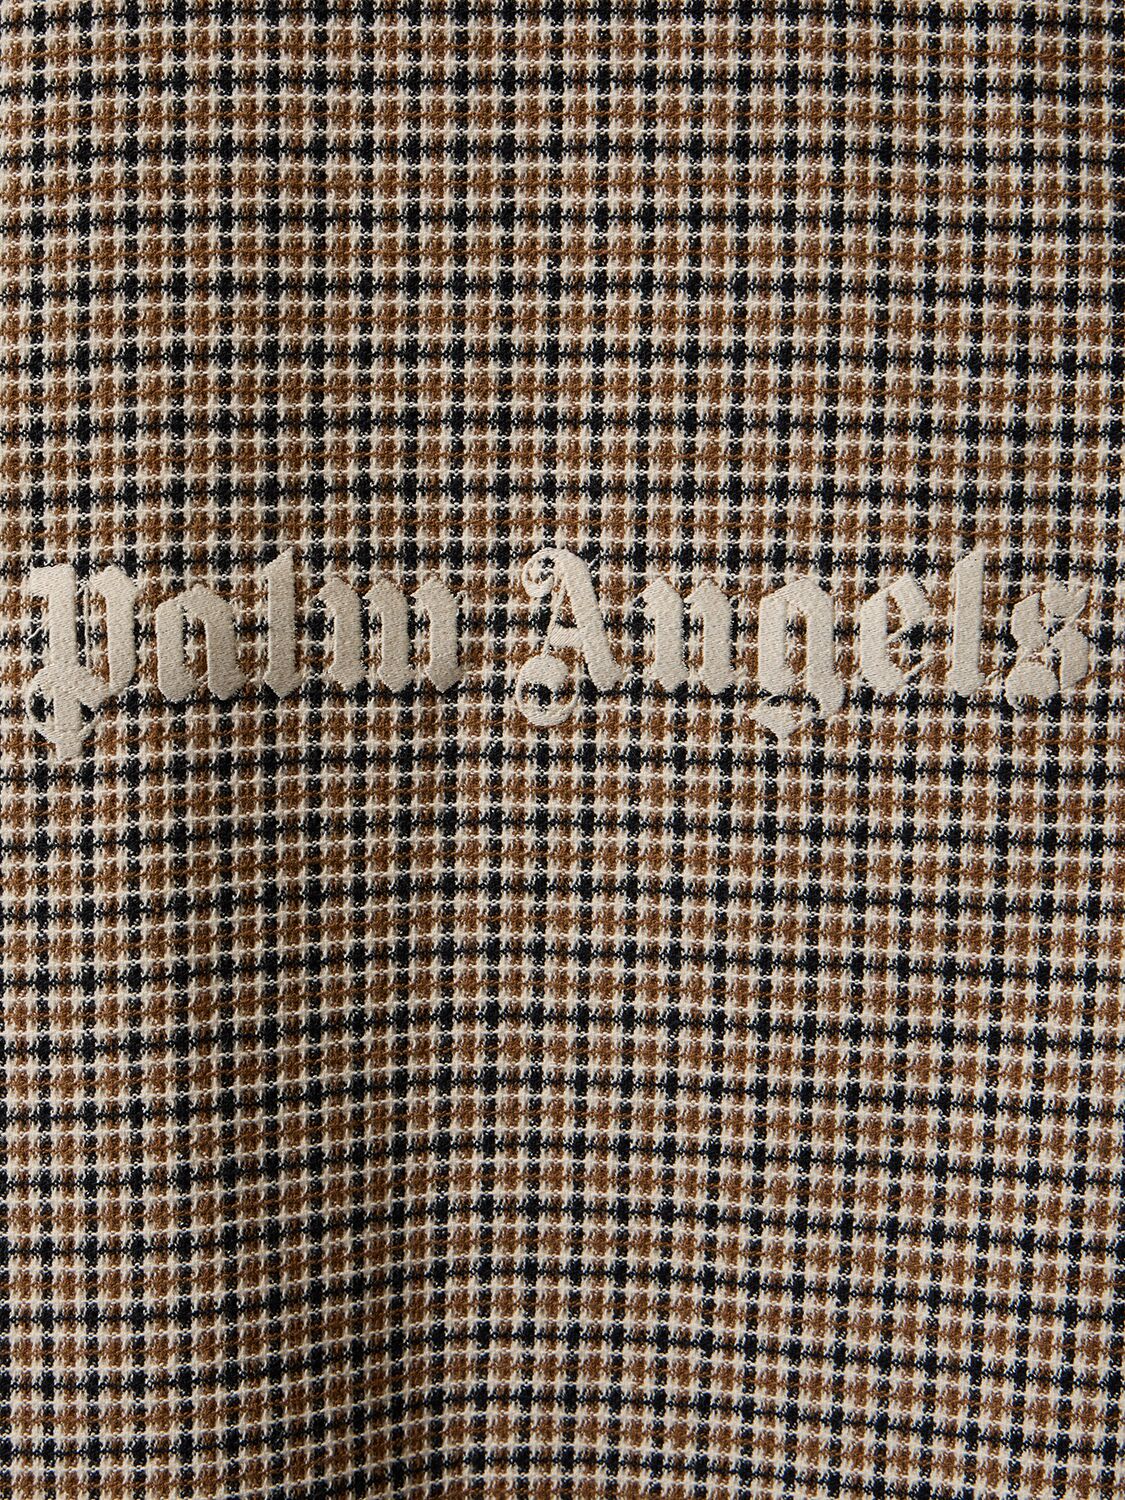 Shop Palm Angels Checked Cotton Overshirt W/logo In Beige,multi